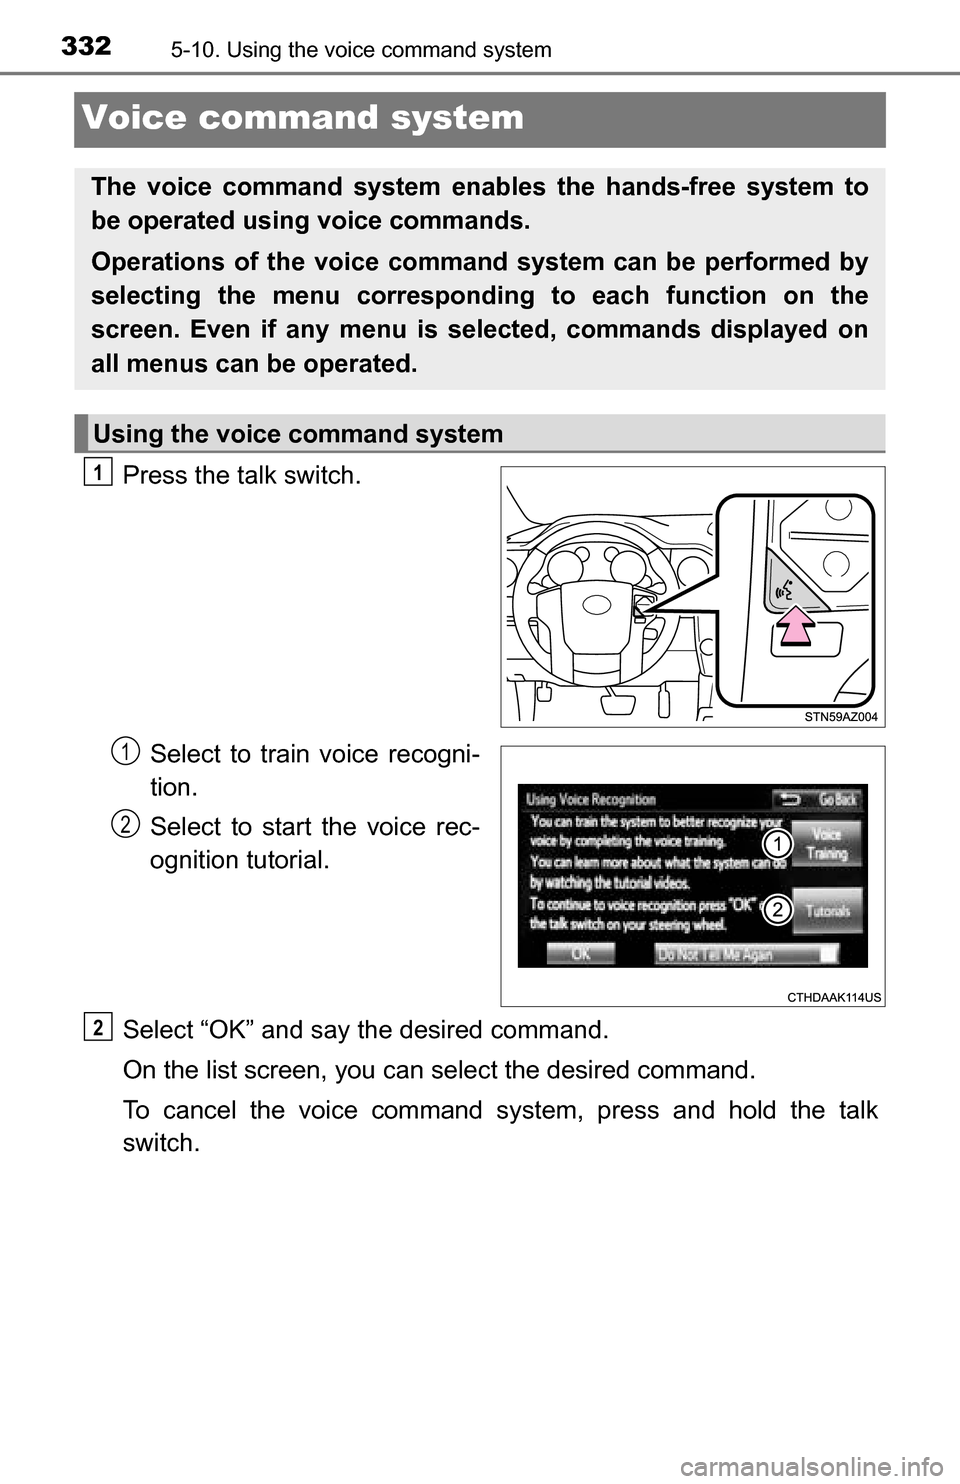 TOYOTA TUNDRA 2016 2.G Owners Guide 3325-10. Using the voice command system
Voice command system
Press the talk switch.Select to train voice recogni-
tion.
Select to start the voice rec-
ognition tutorial.
Select “OK” and say the de